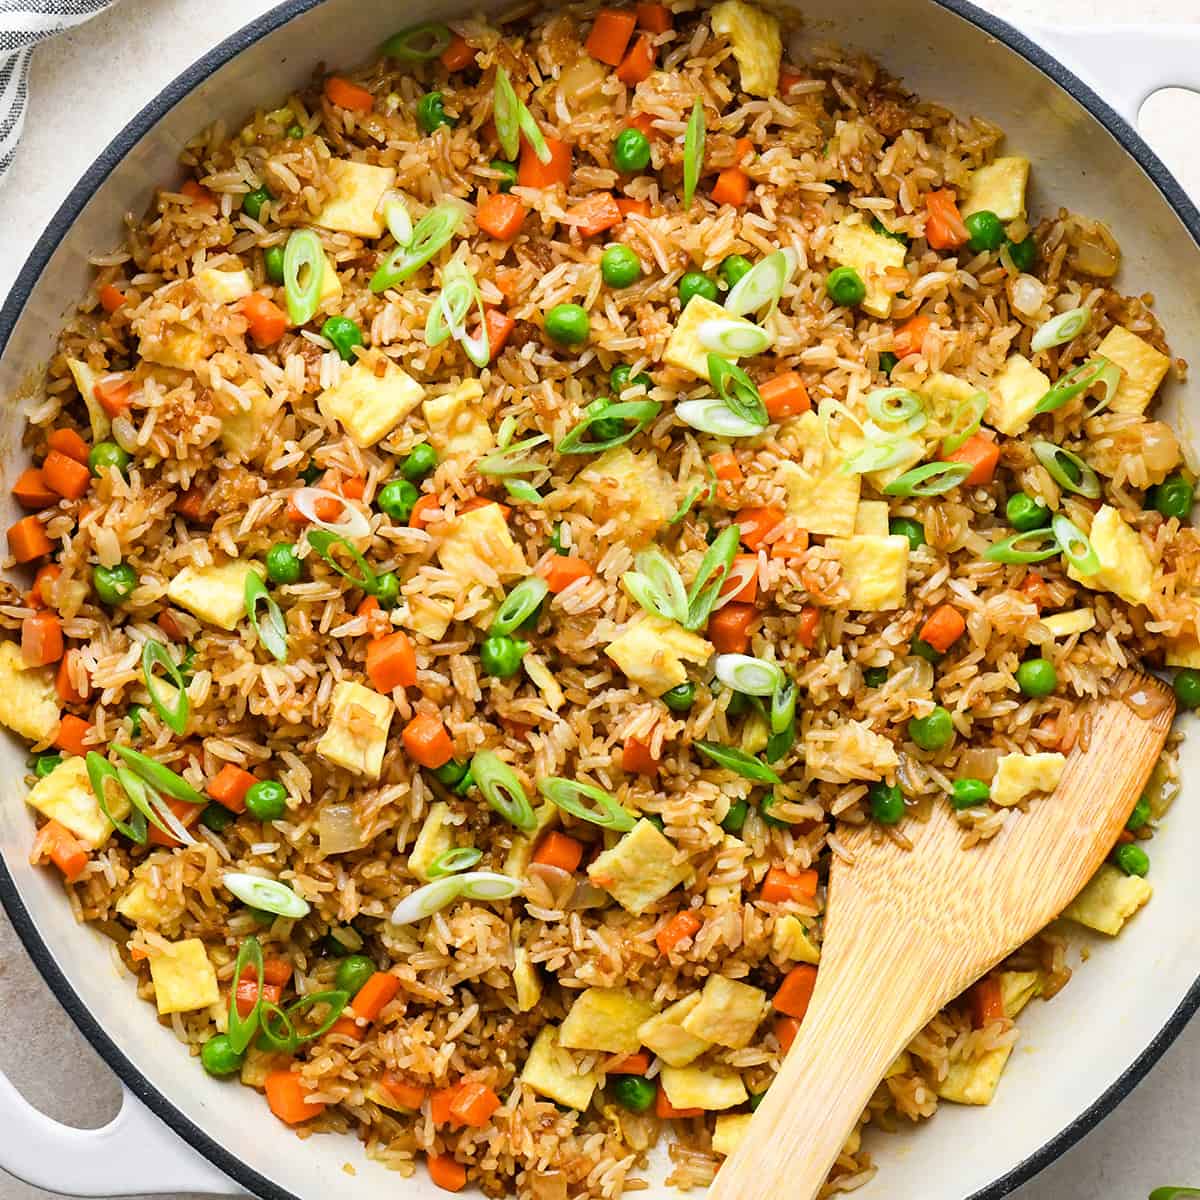 Fried Rice Recipe in a pan with a wooden serving spoon